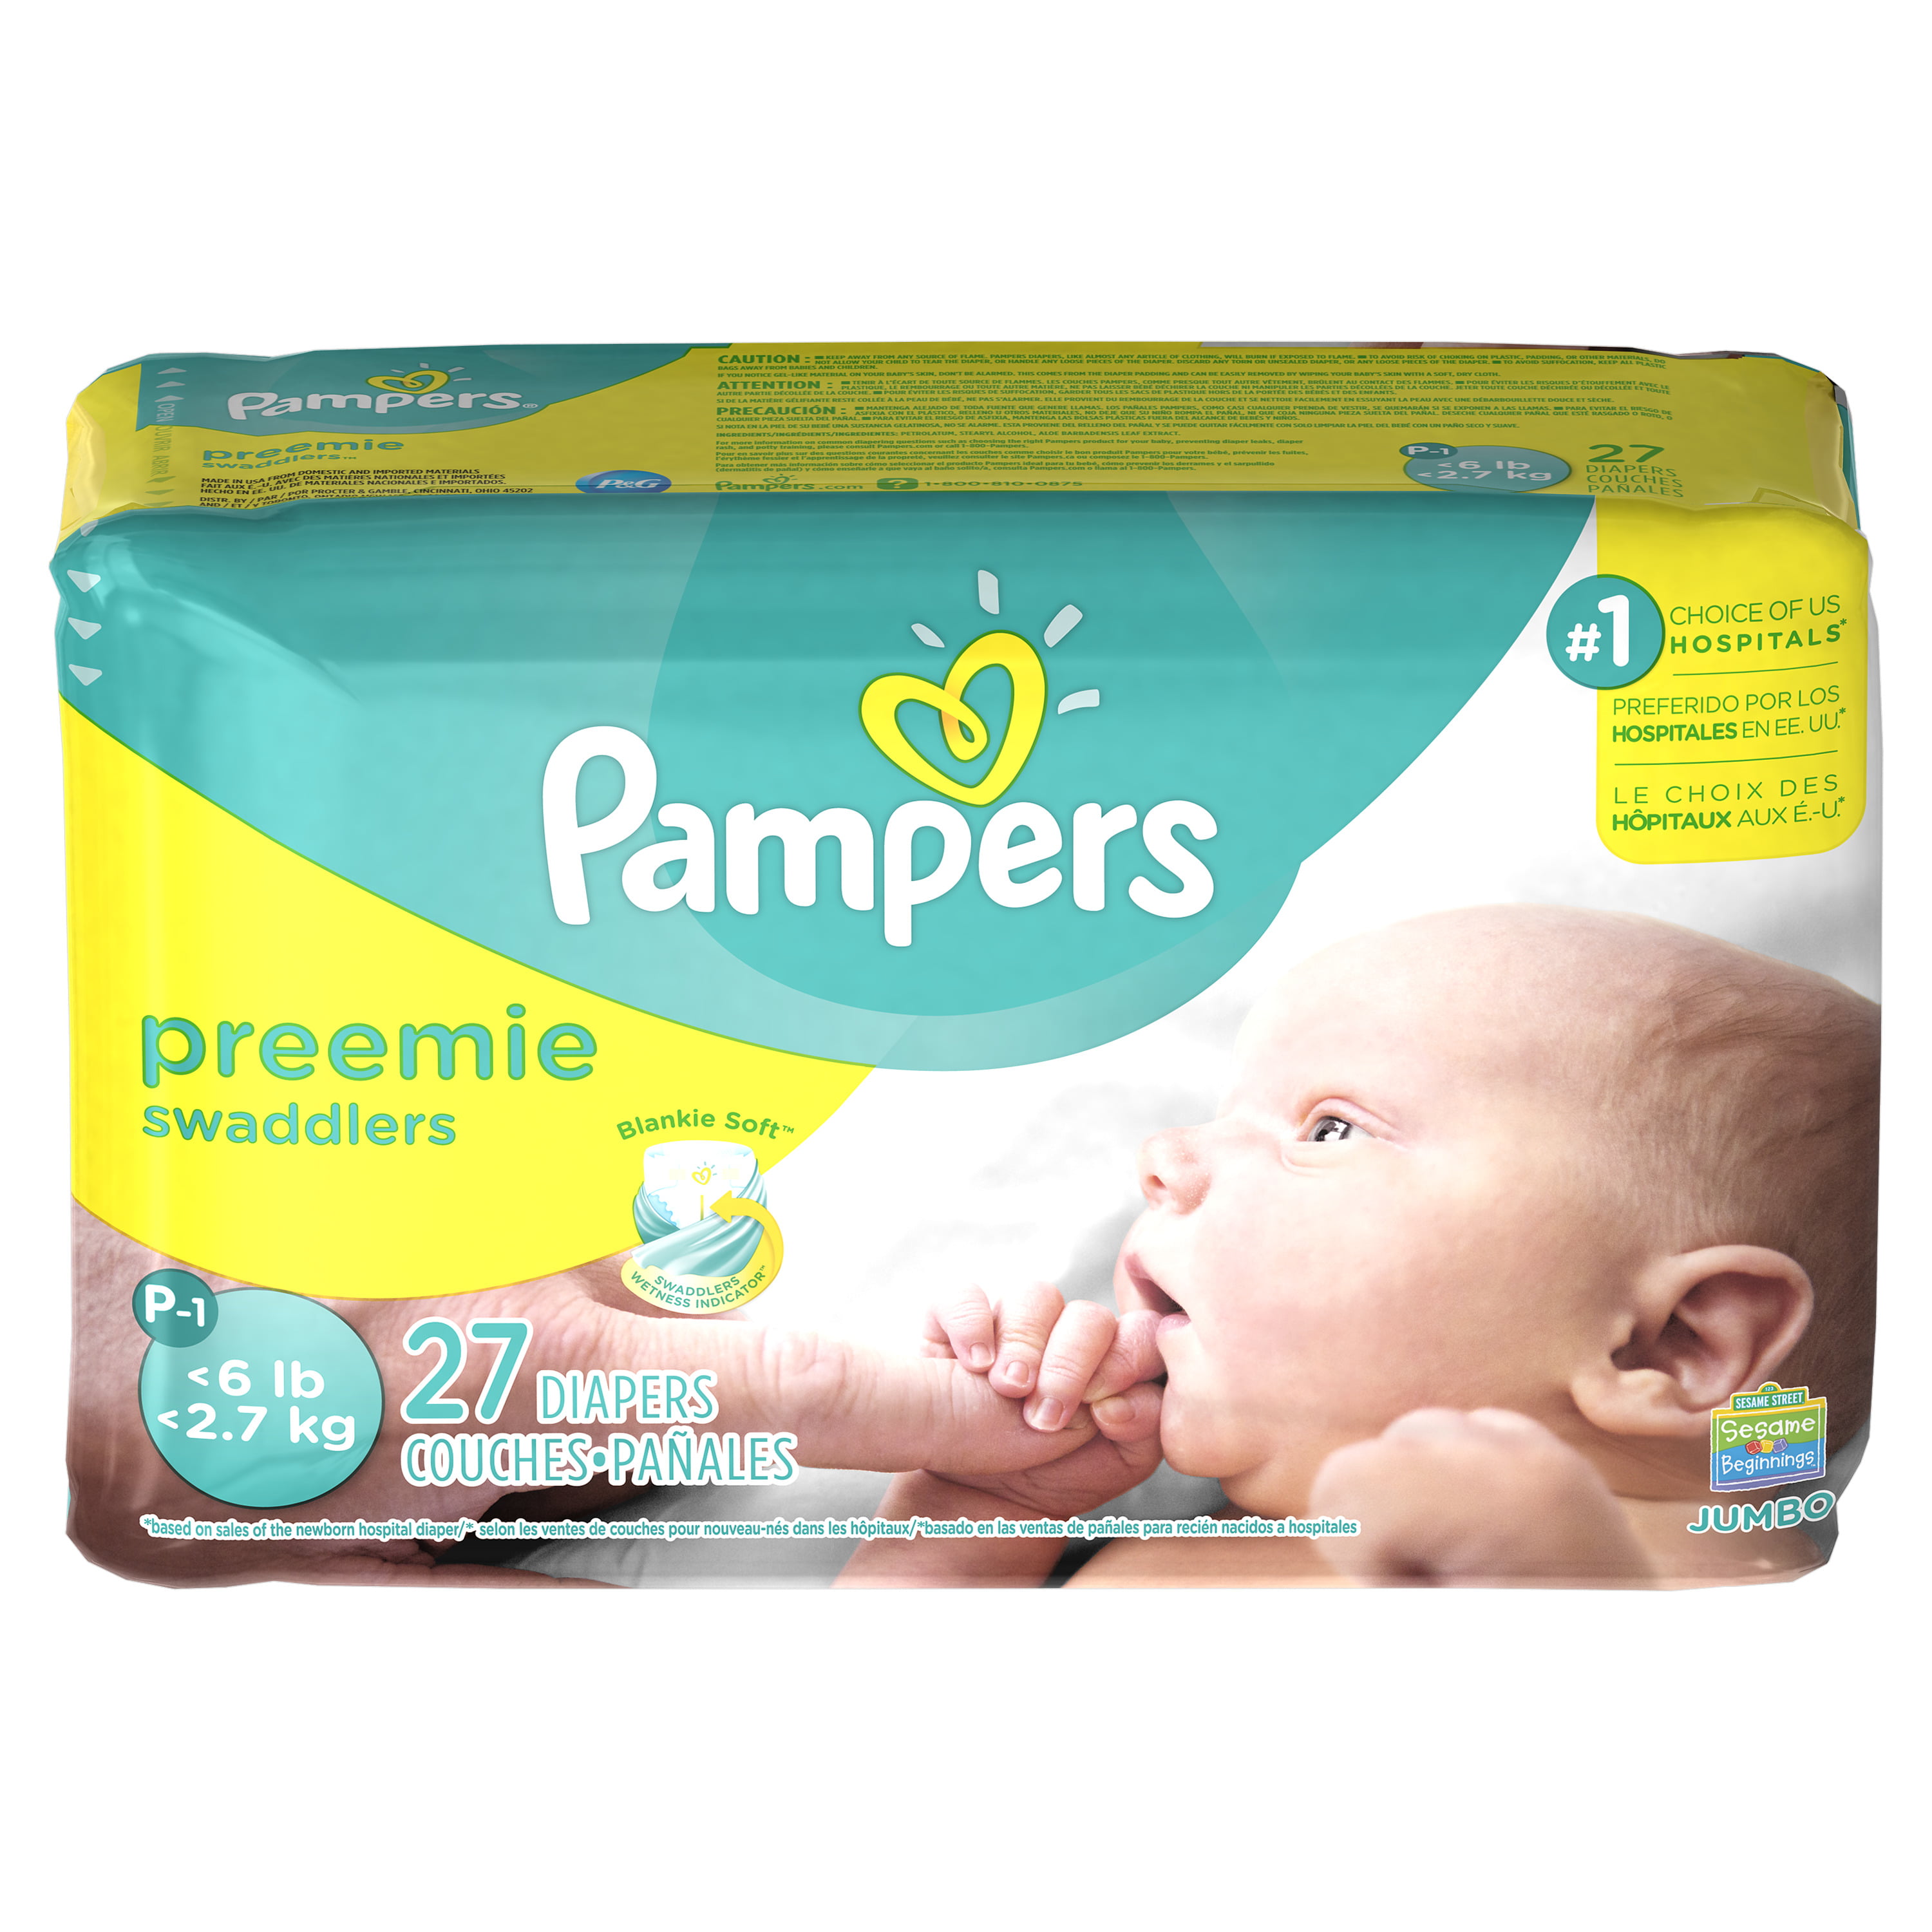 Absorbent Preemie Diapers, Size P-1 